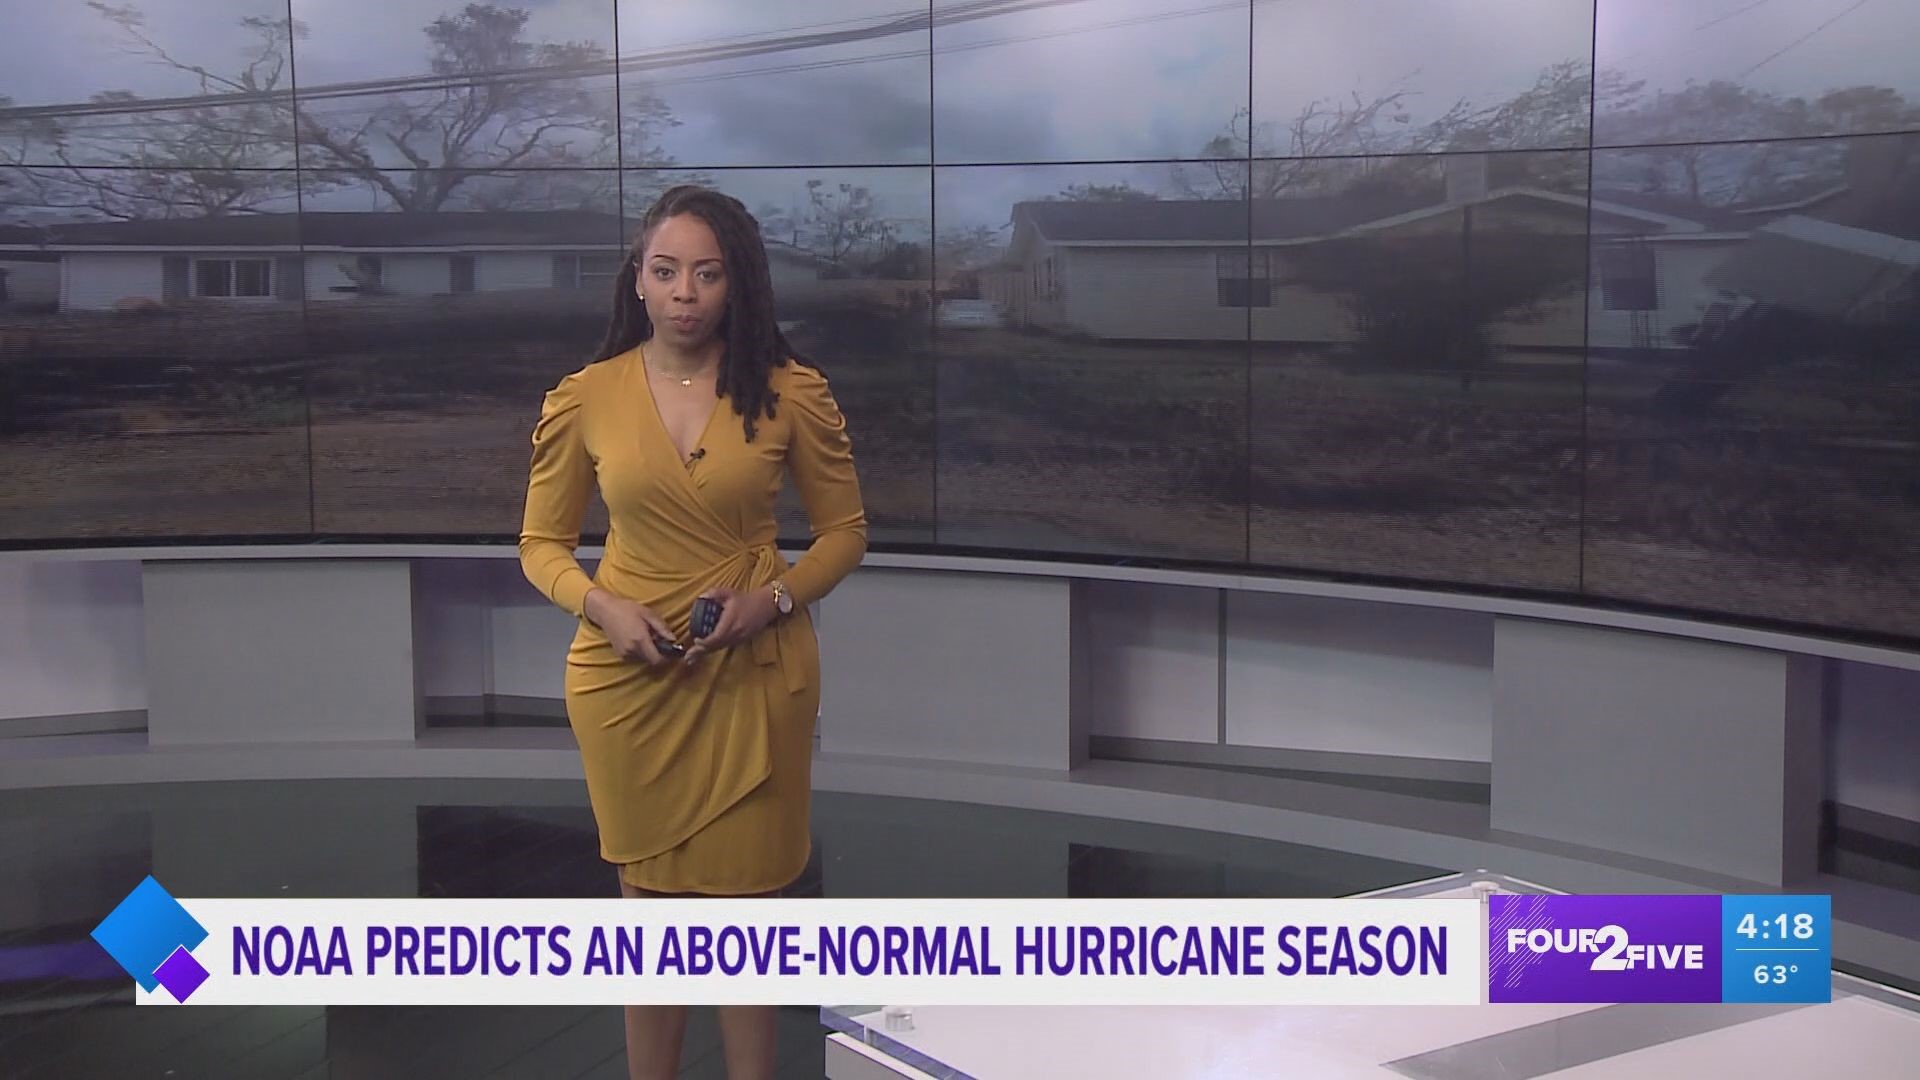 The official start of the 2022 hurricane season is June 1.